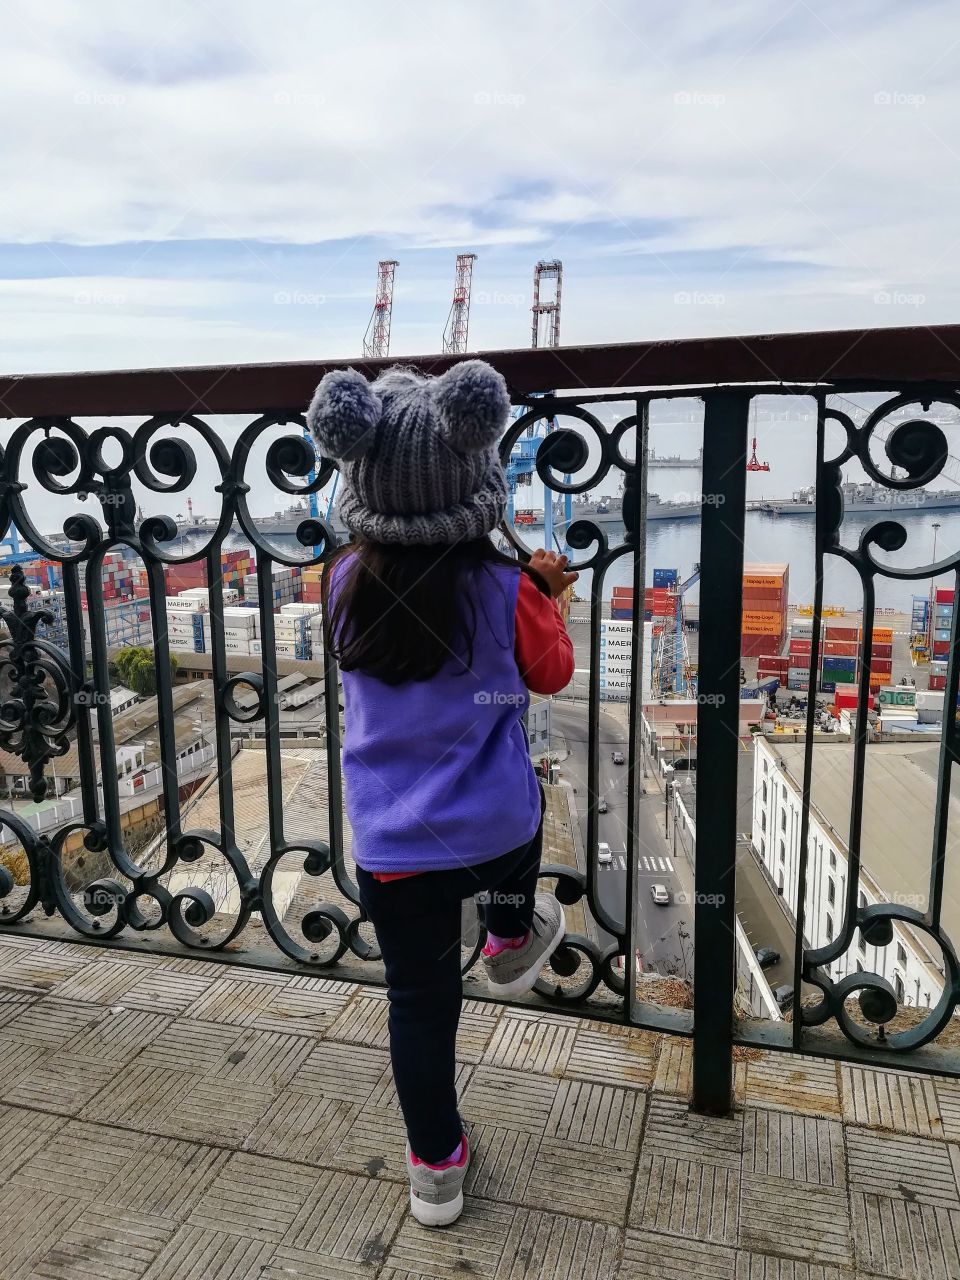 My daughter Salome contemplates the beautiful view from the artillery hill in Valparaíso, captivated by the pier and its large ships and colorful containers